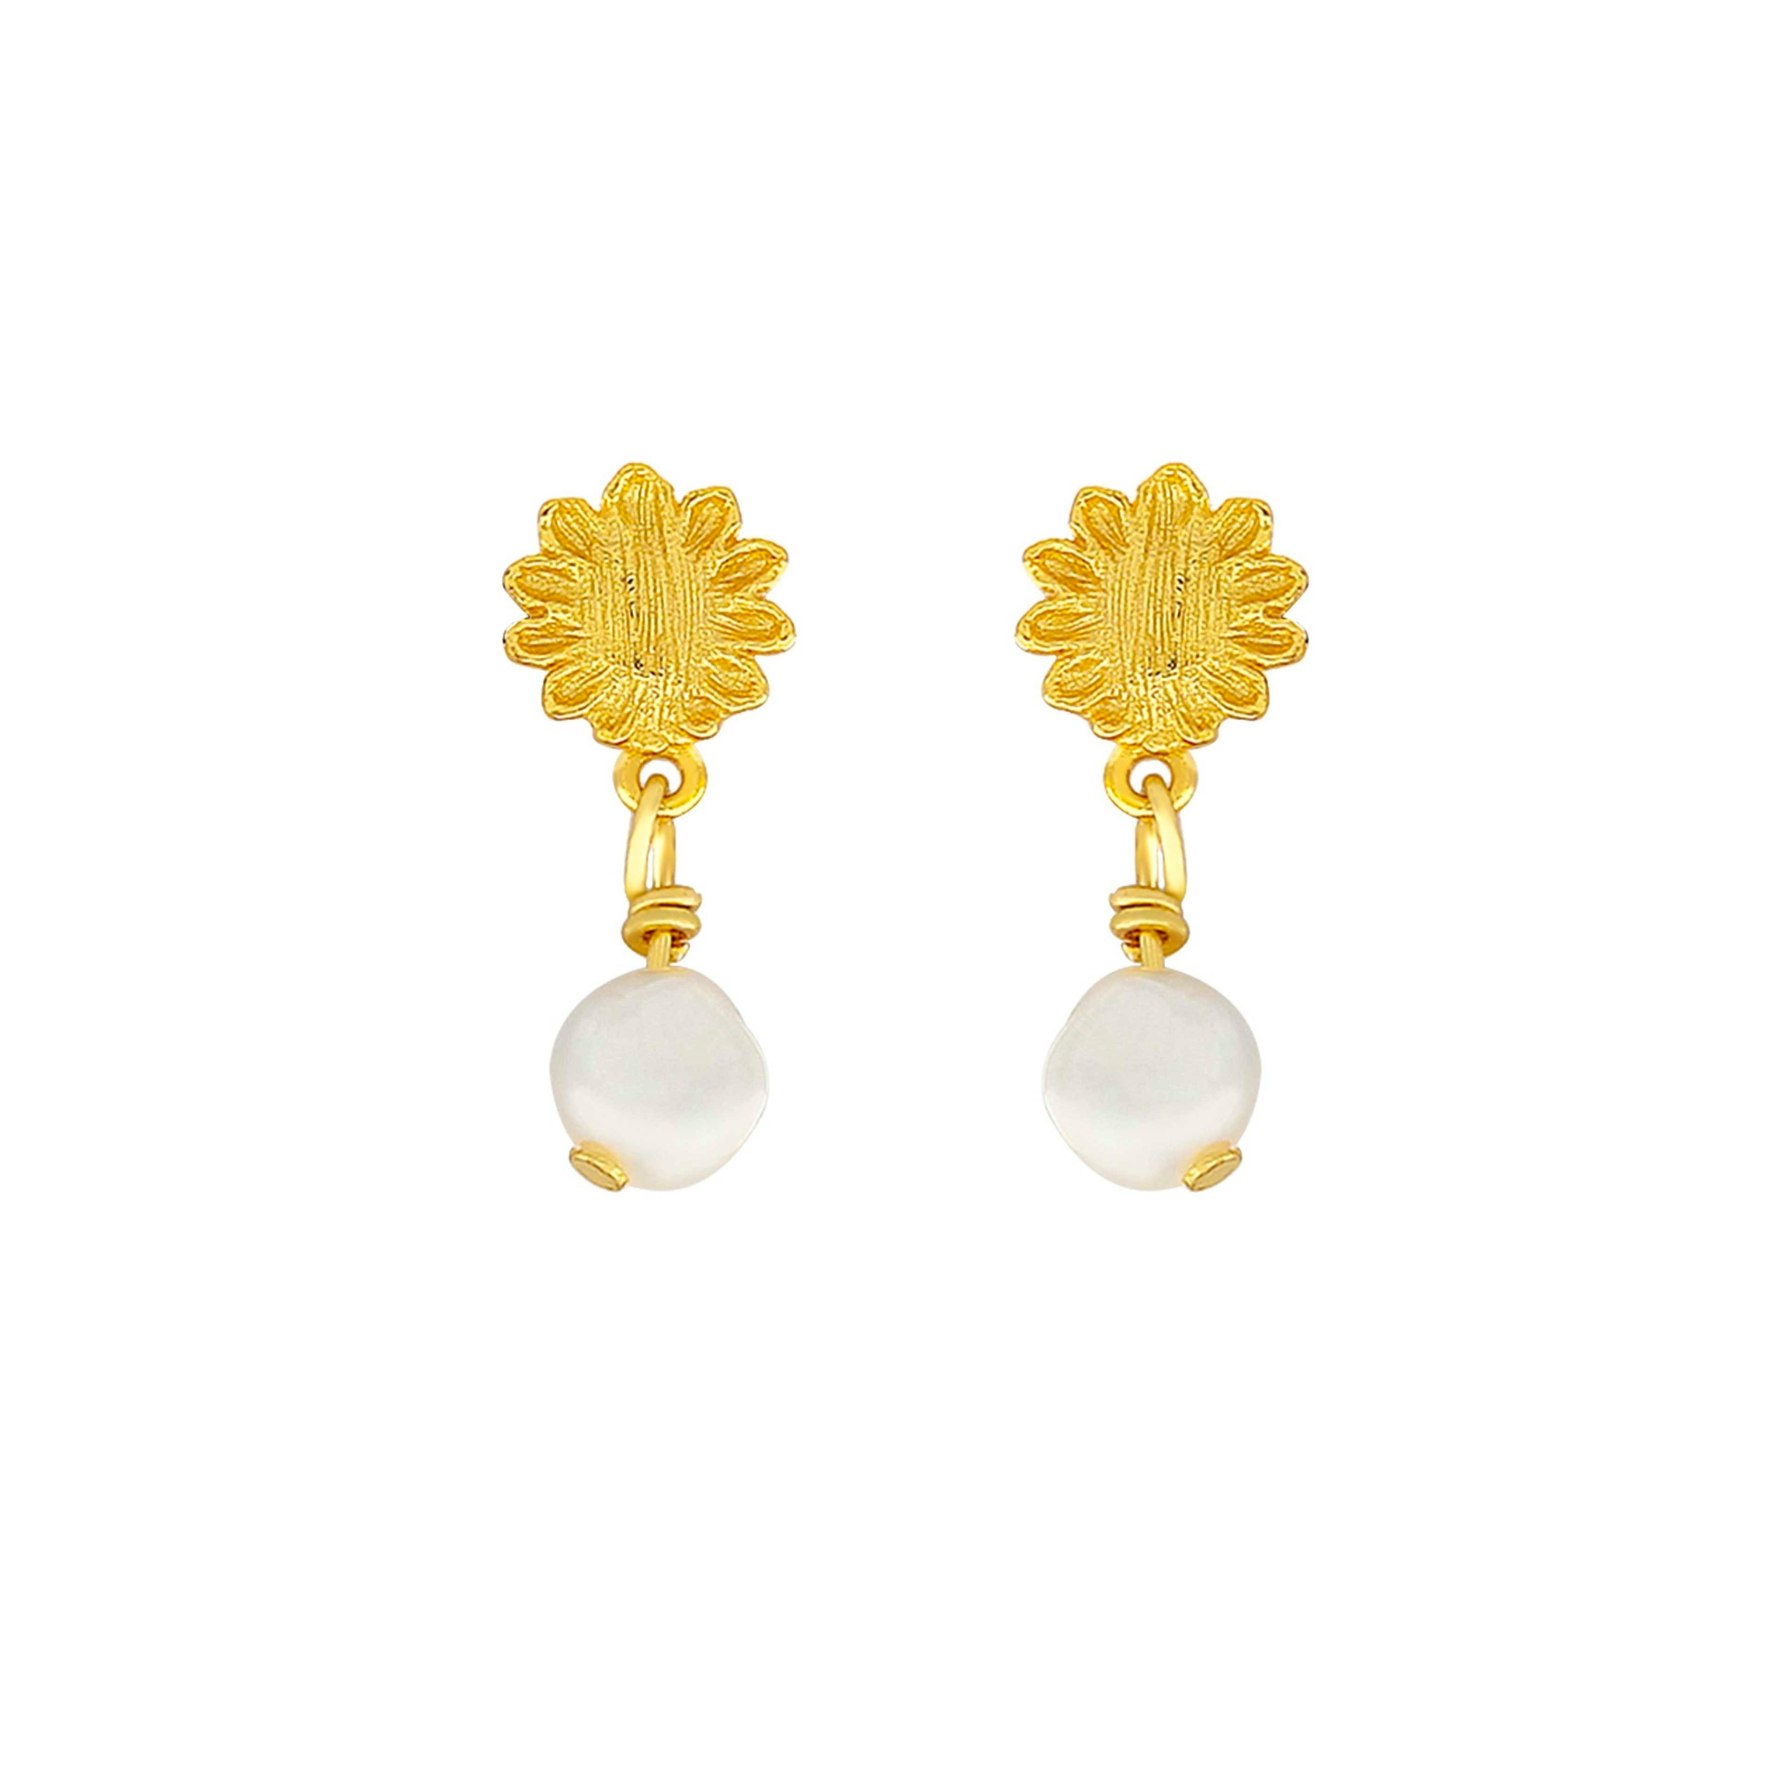 Evelyn Pearl Earrings from Hultquist Copenhagen in Goldplated Silver Sterling 925